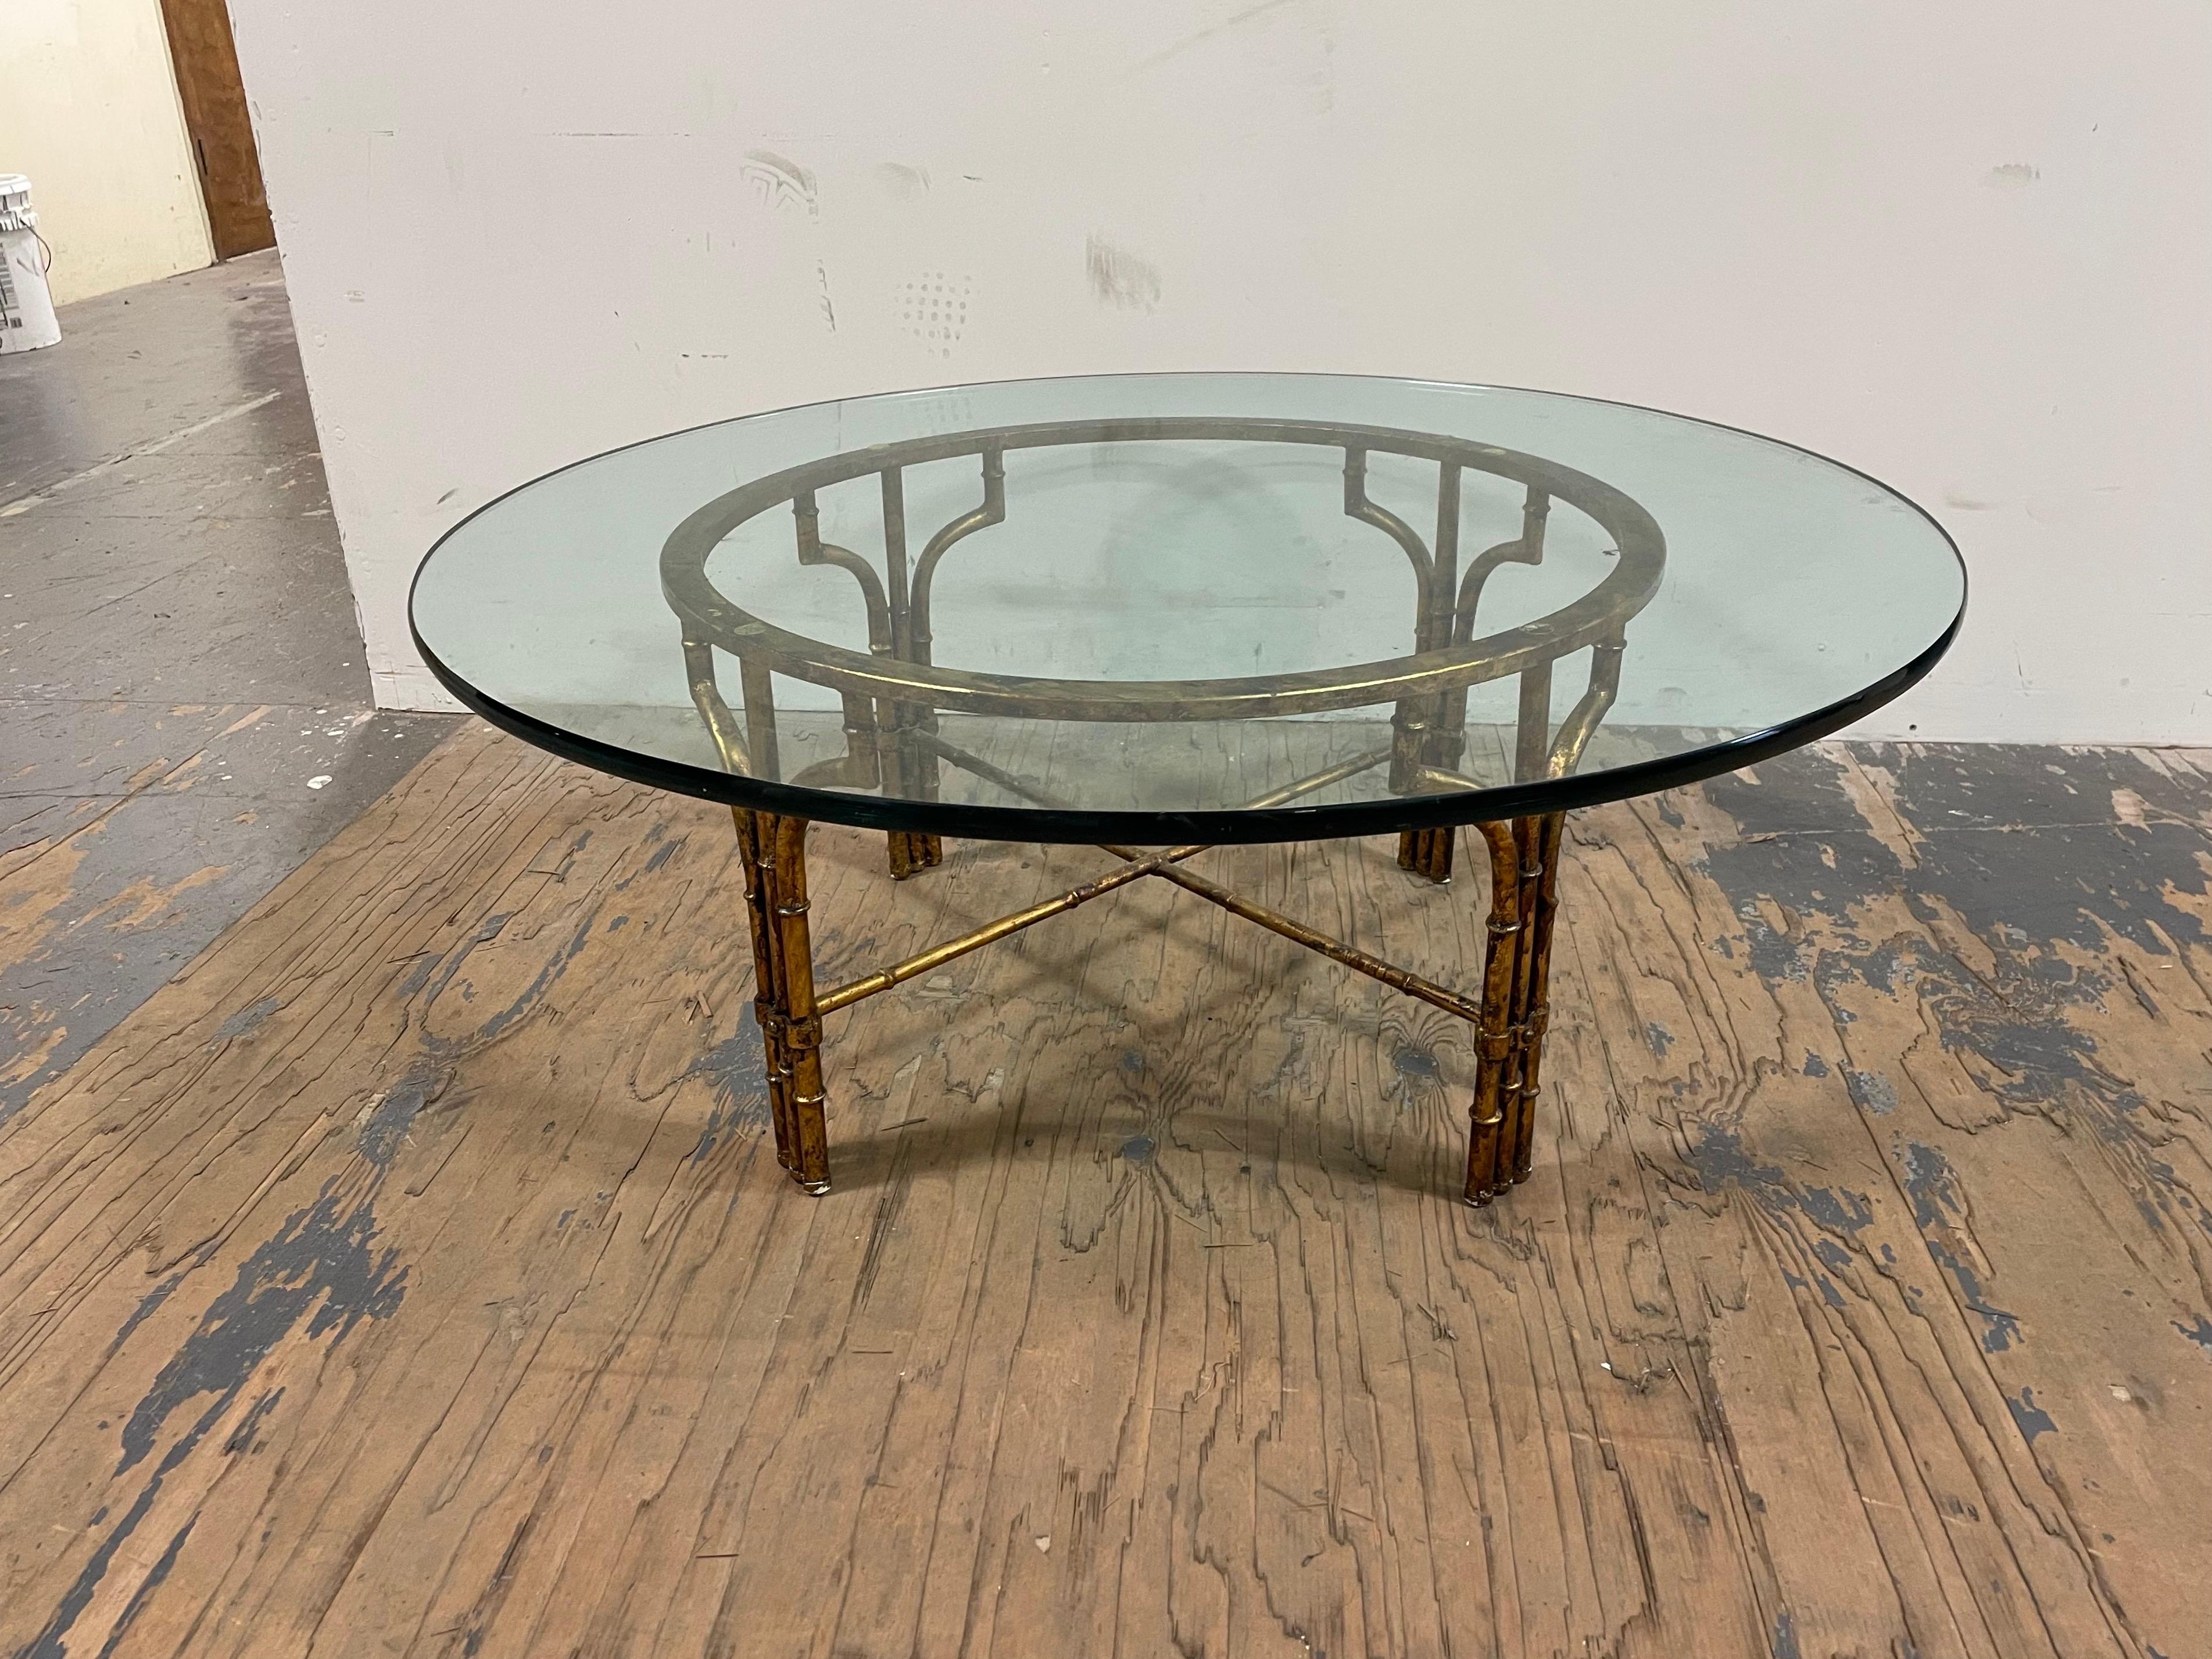 Gilt bamboo and glass coffee table. Thick circular glass. Timeless lines and design for versatility.